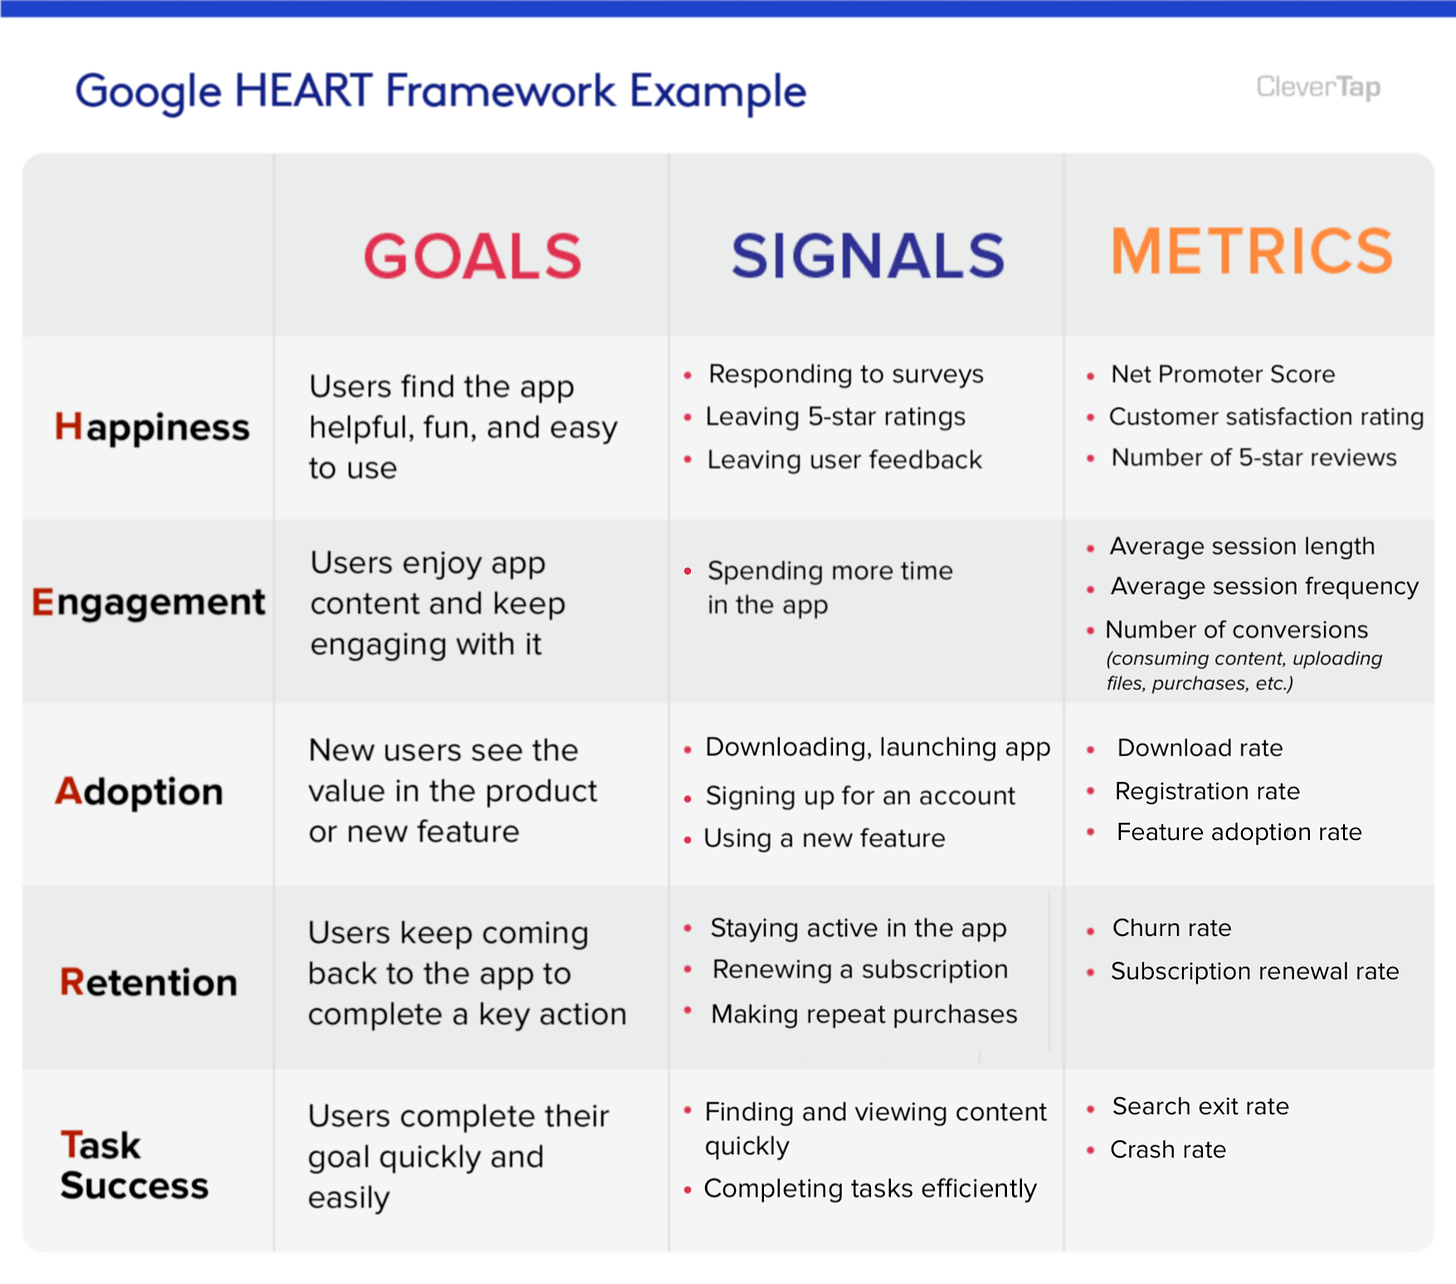 How Google measures and improves UX with the HEART framework | Appcues Blog